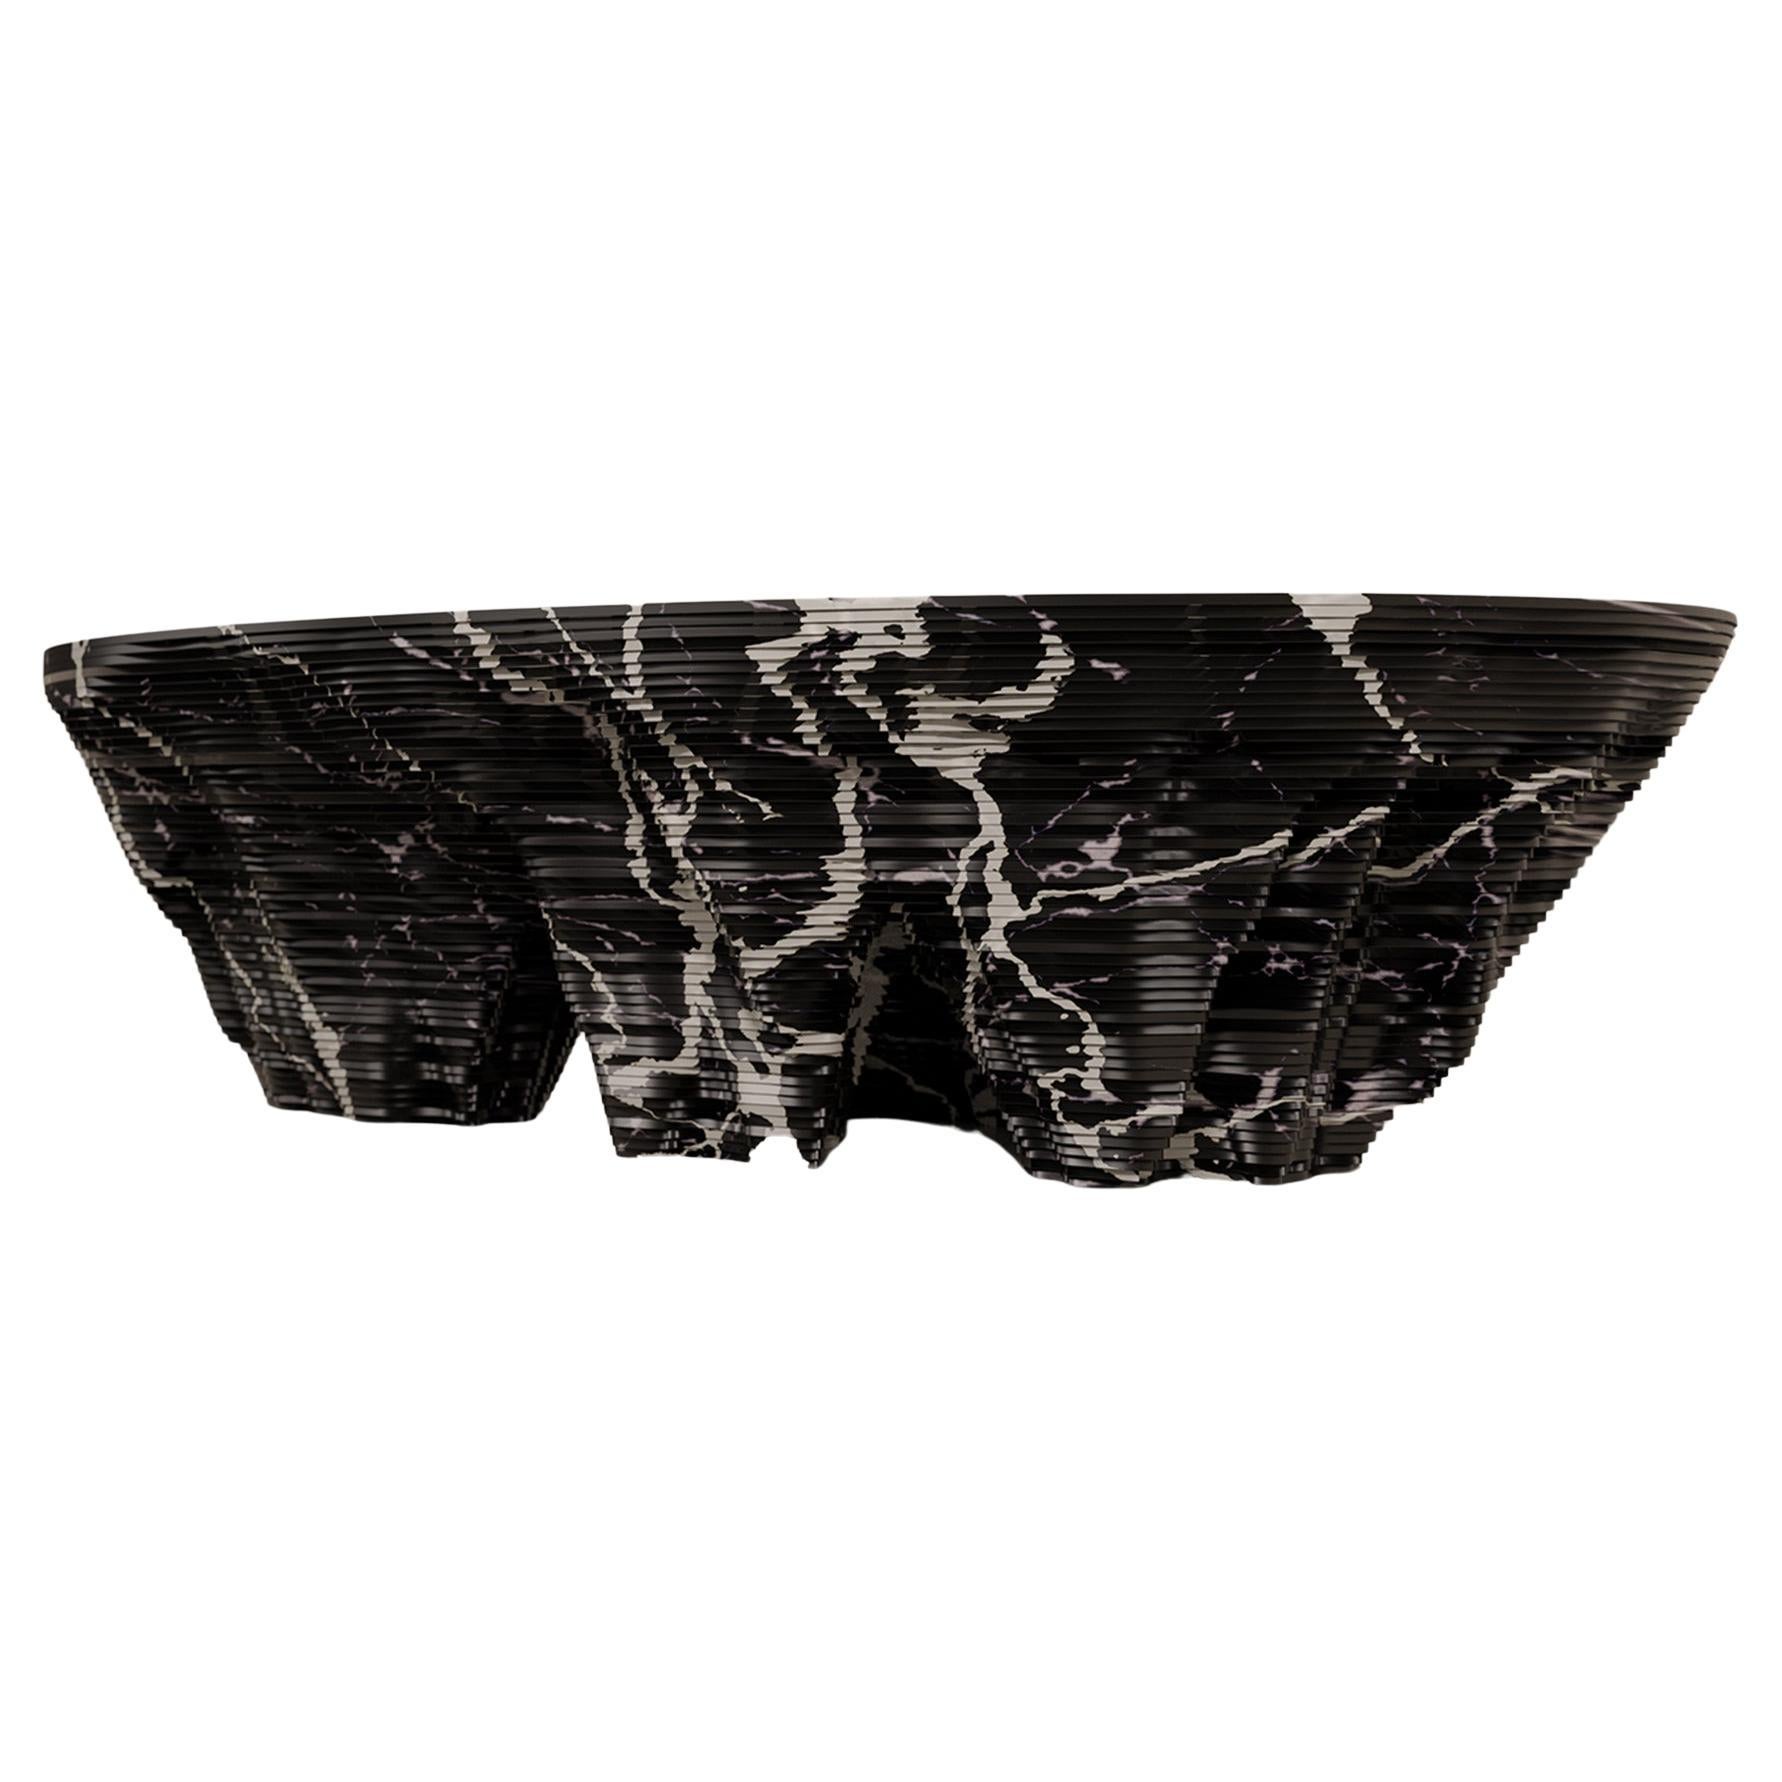 21st Century Modern Monument Valley Coffee Table, Solid Black Marble